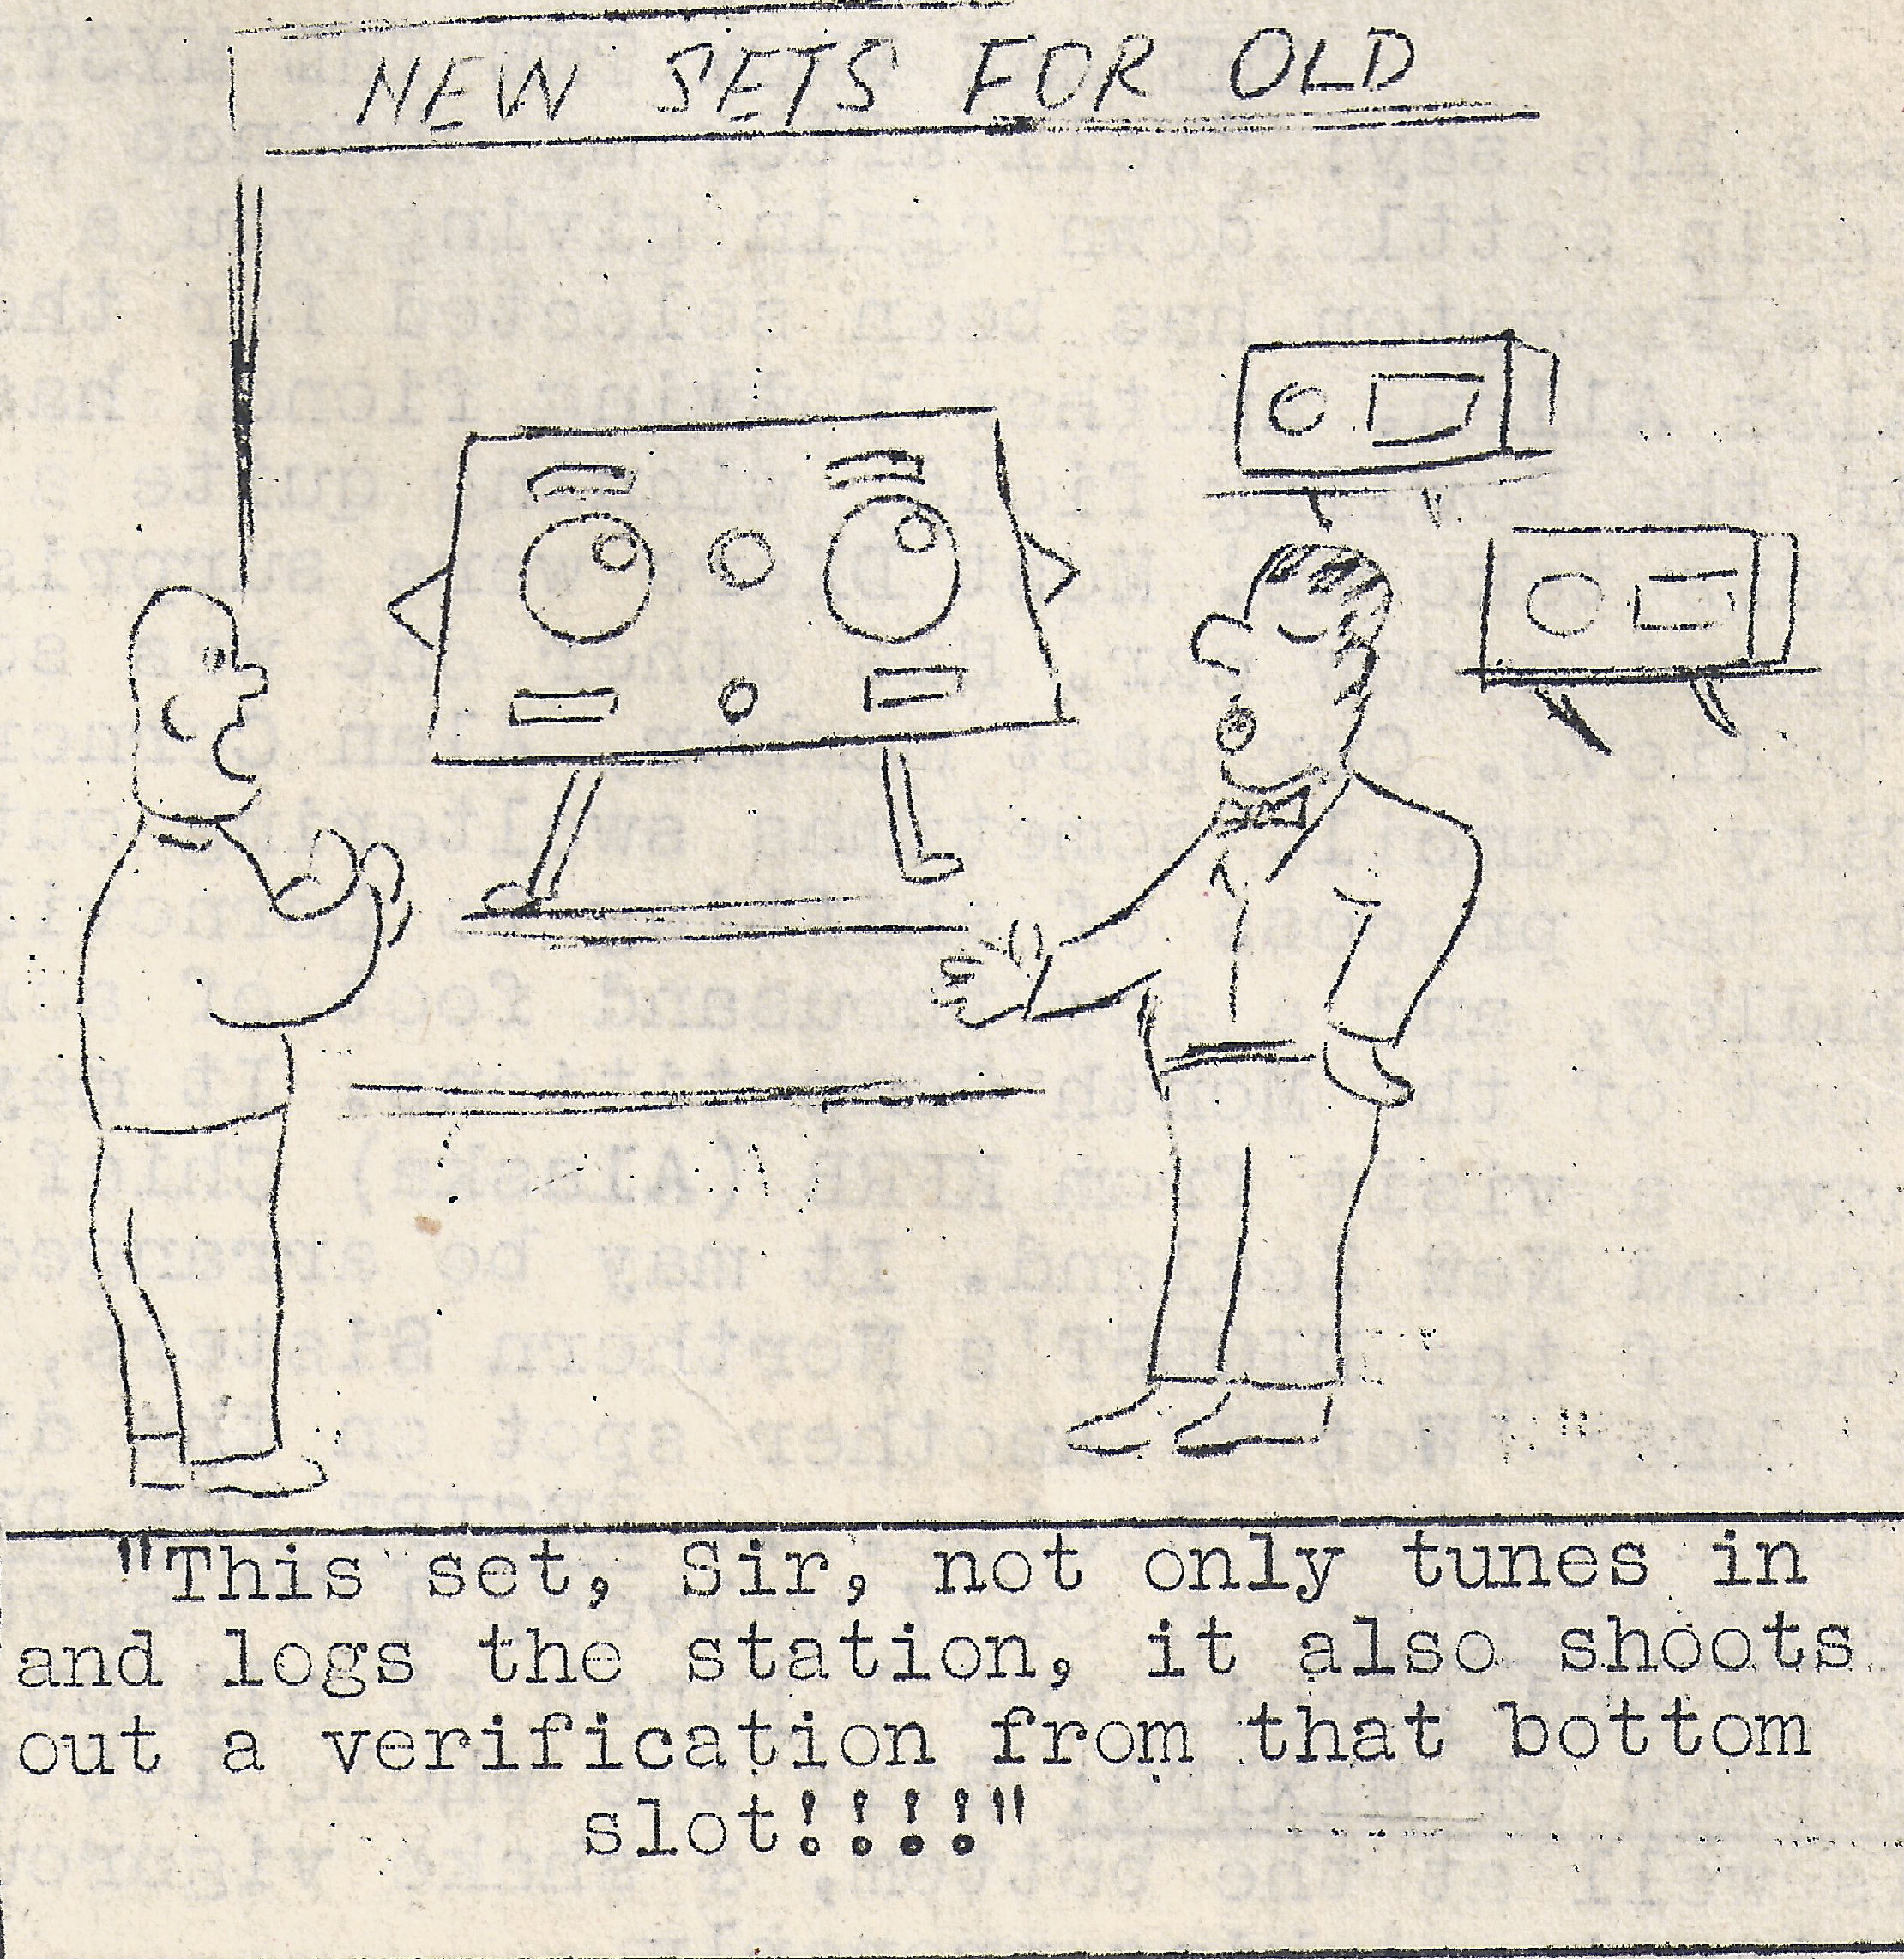 Receiver Joke from Aug 1956